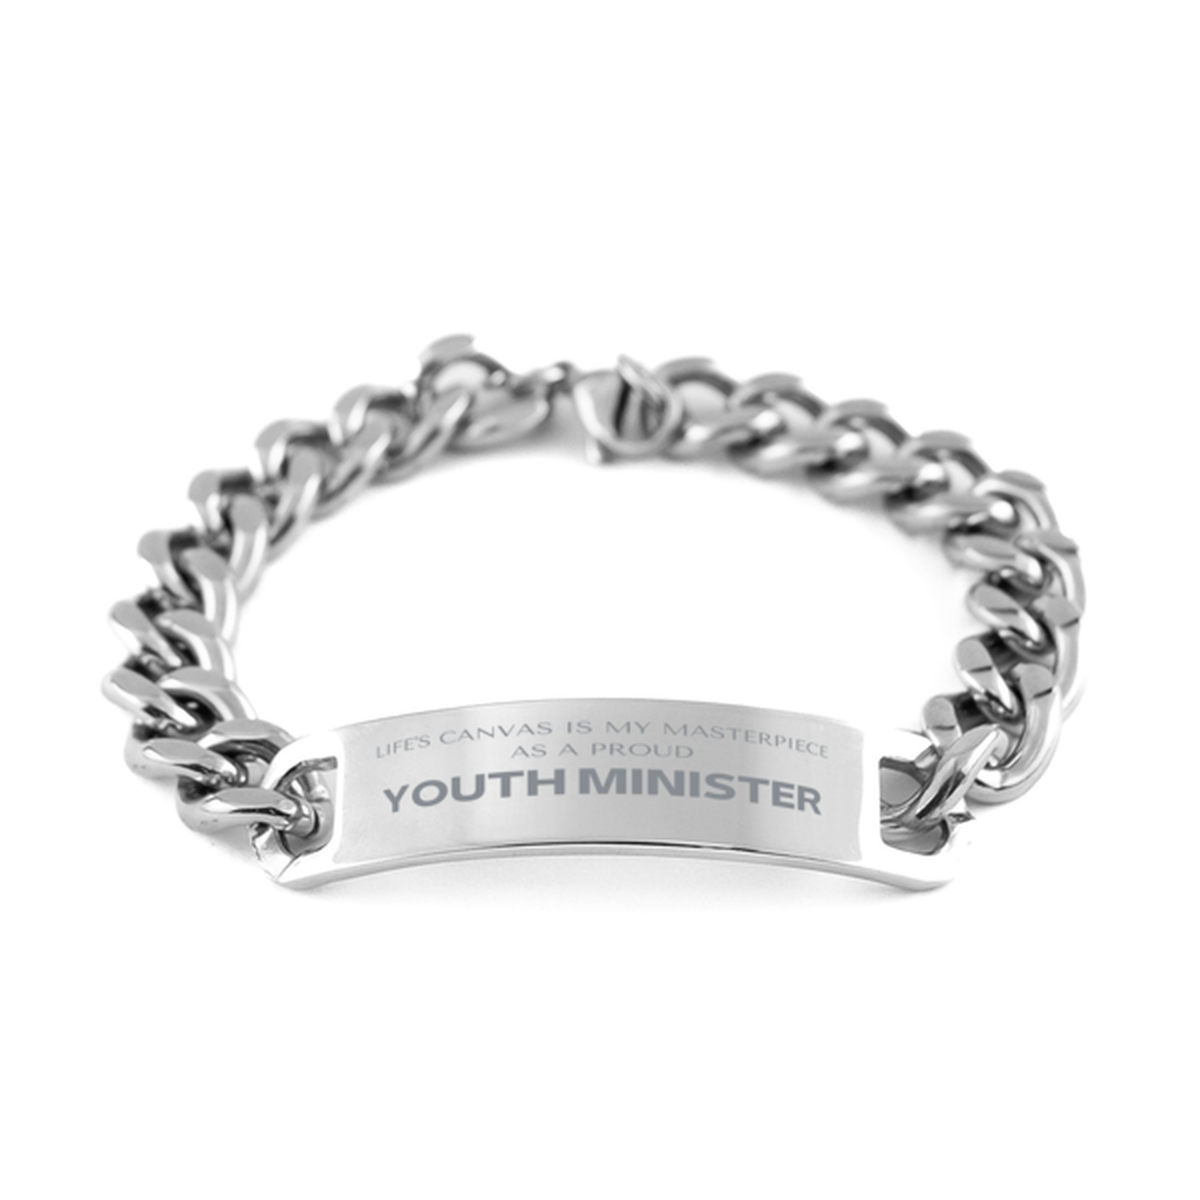 Proud Youth Minister Gifts, Life's canvas is my masterpiece, Epic Birthday Christmas Unique Cuban Chain Stainless Steel Bracelet For Youth Minister, Coworkers, Men, Women, Friends